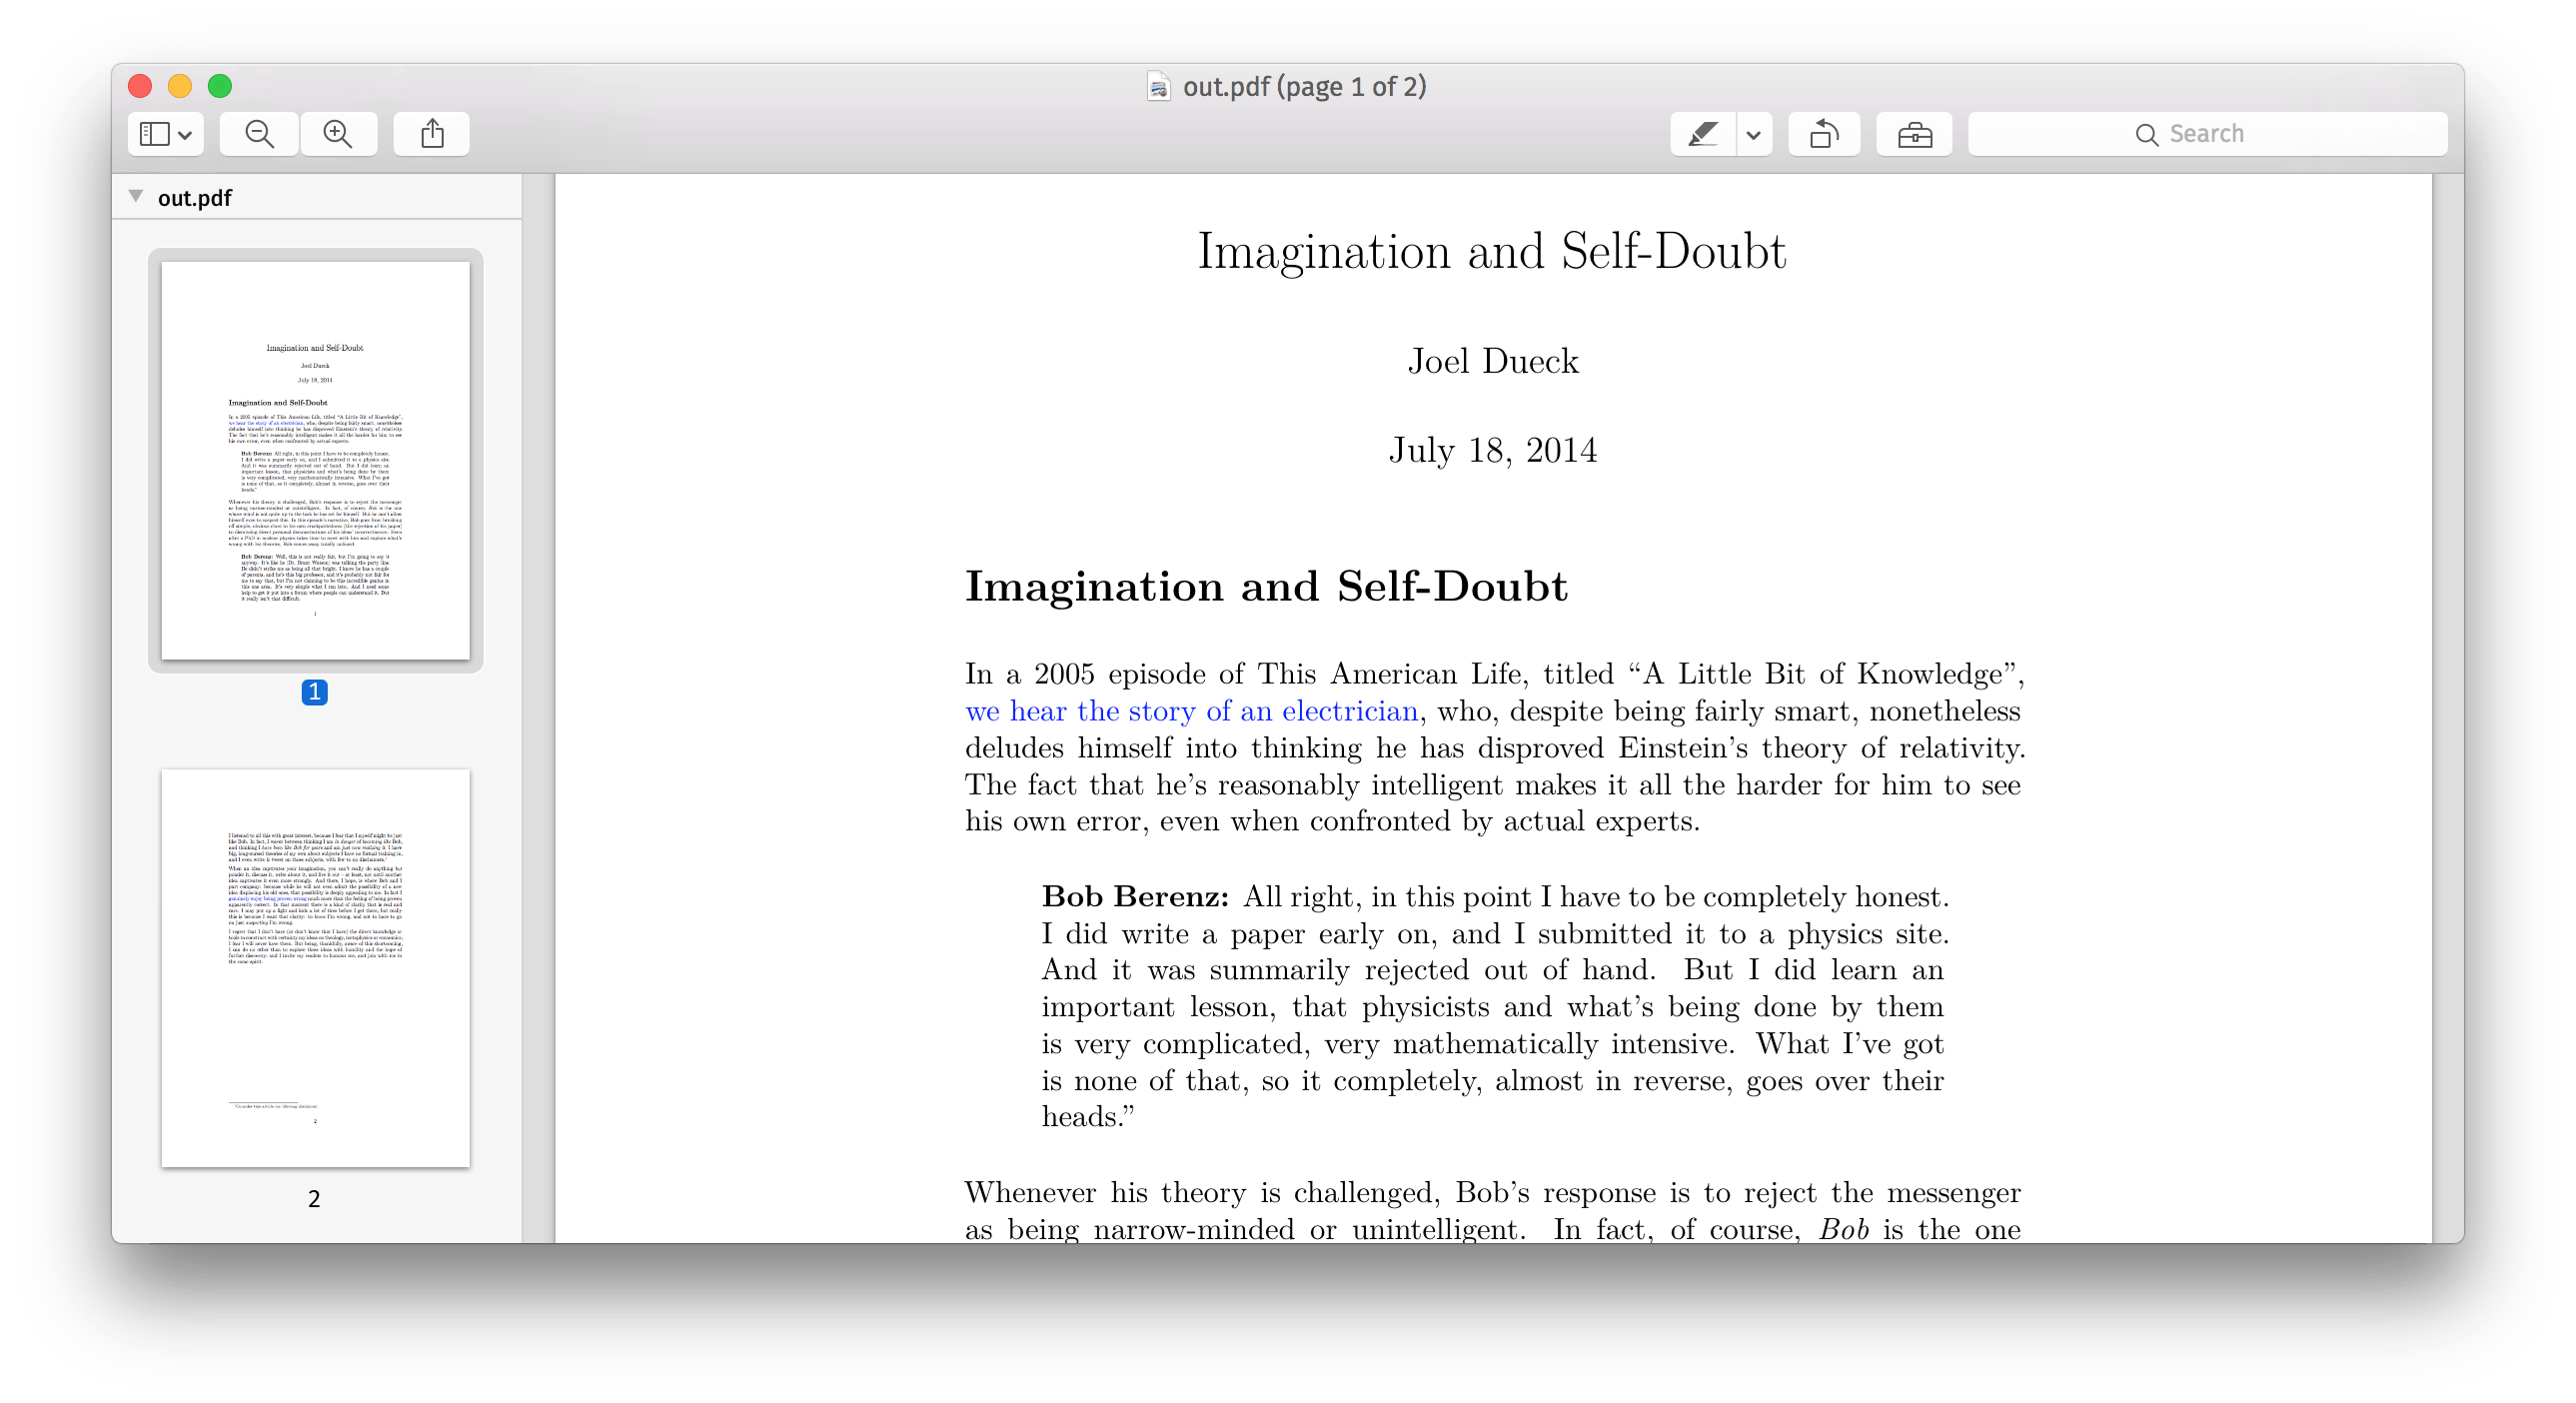 Simple PDF output from pandoc